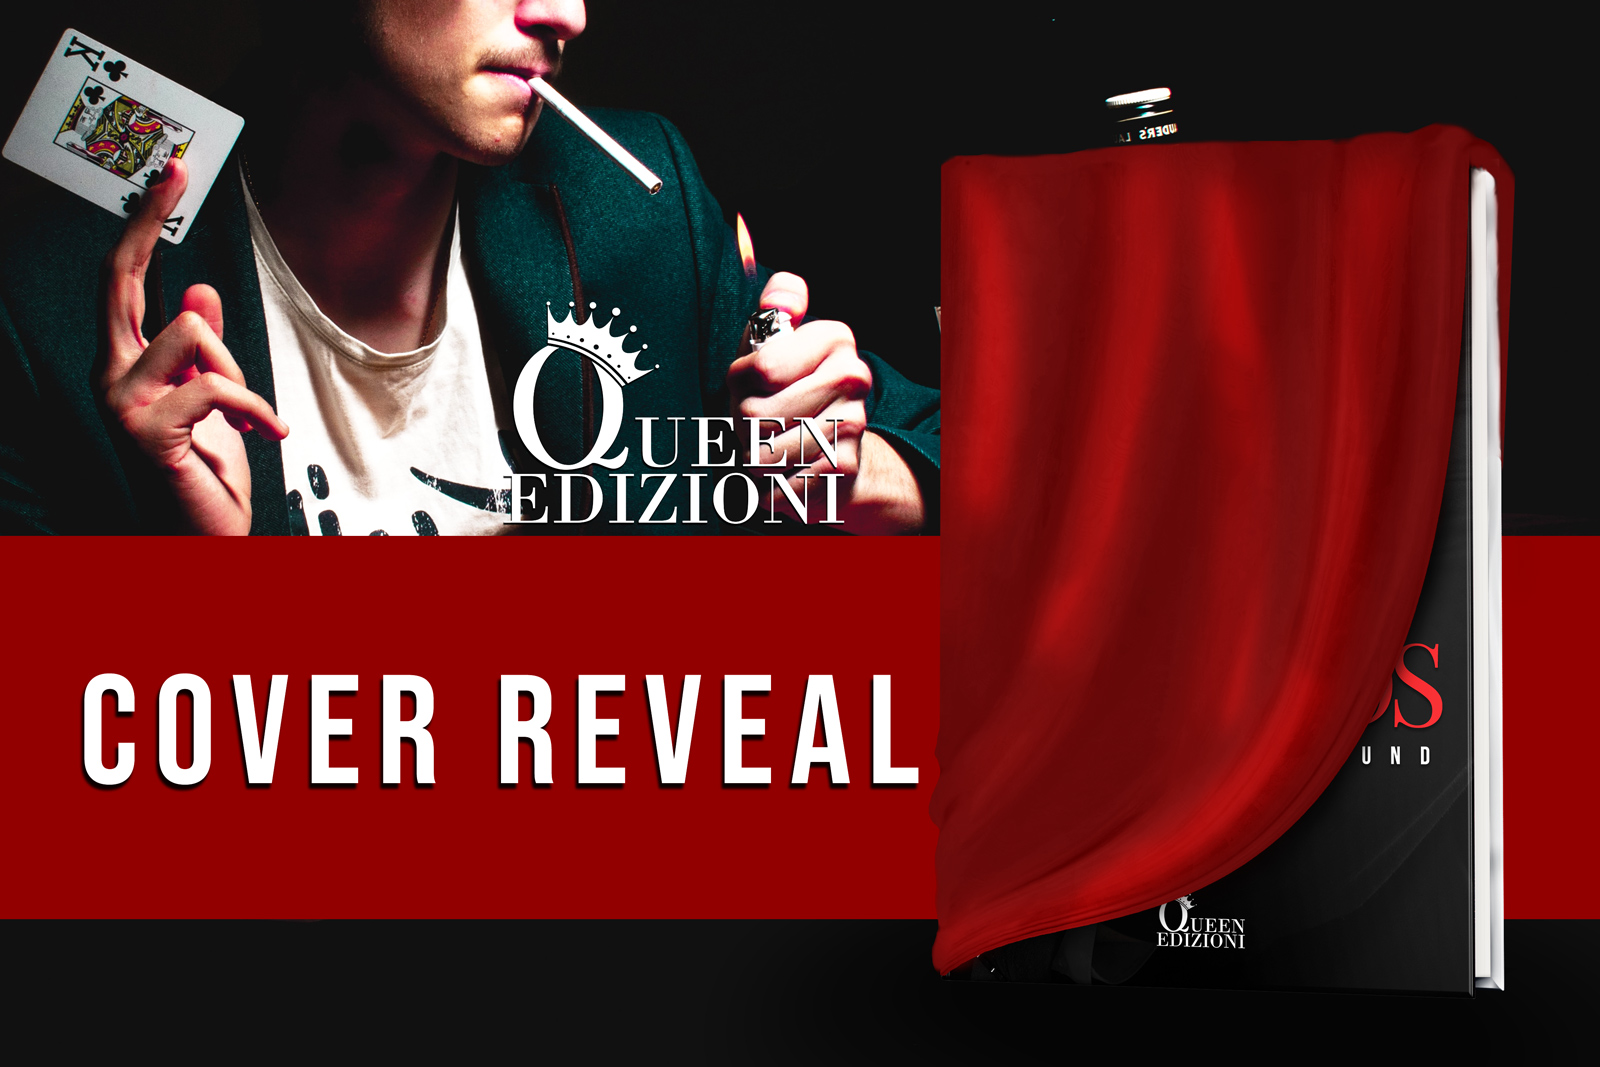 Cover reveal: King of diamonds